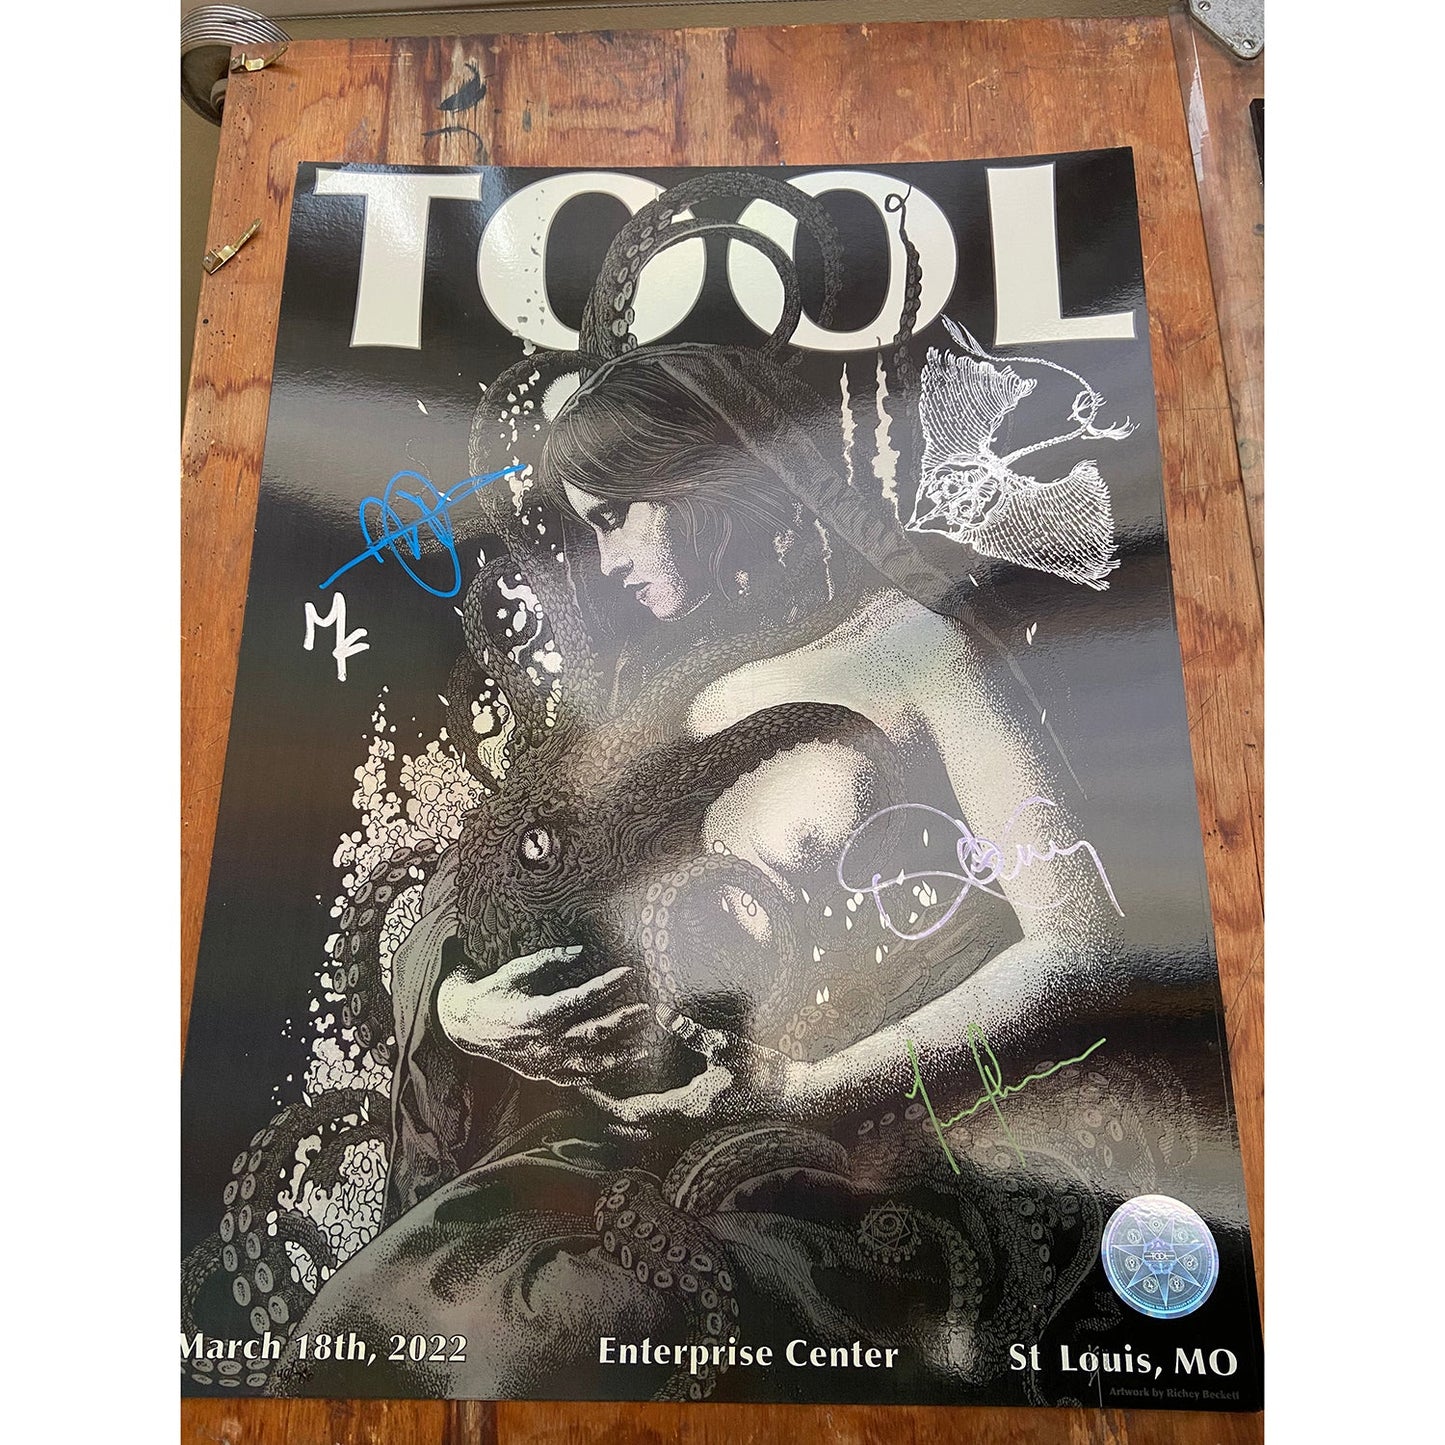 TOOL - Remarqued Edition (Signed)